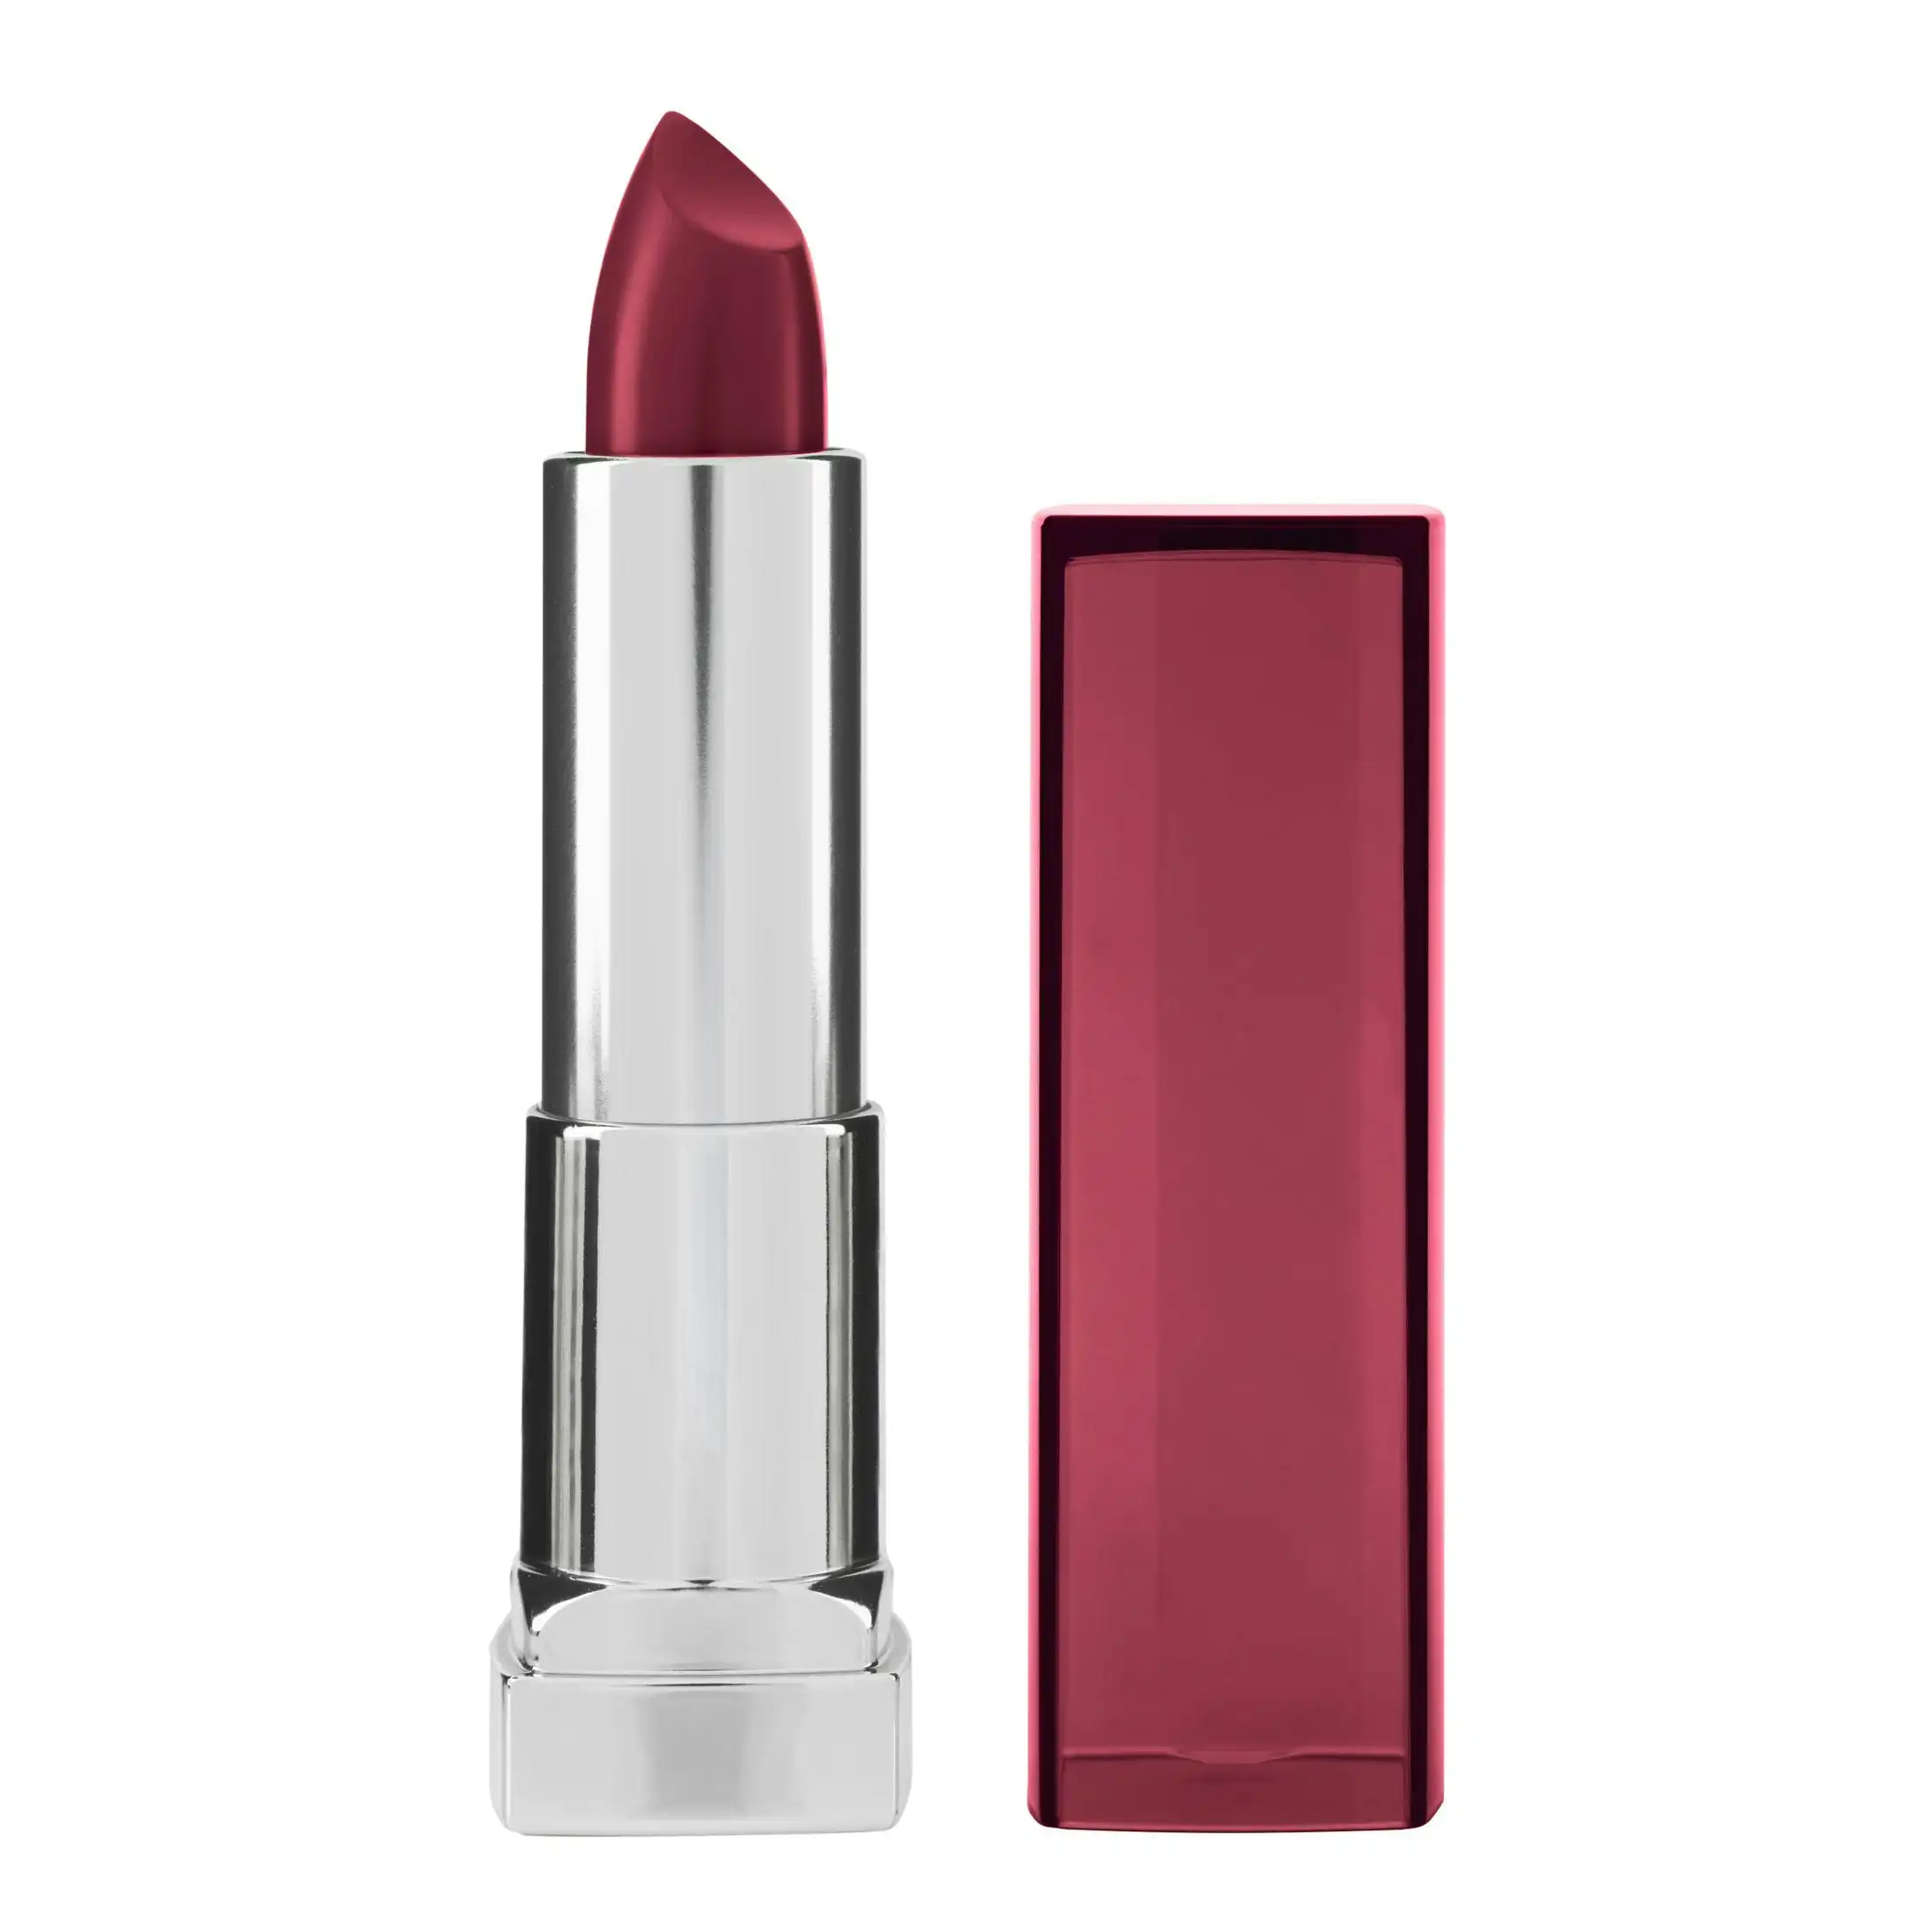 Maybelline Color Sensational Smoked Roses Lipstick - Flaming Rose